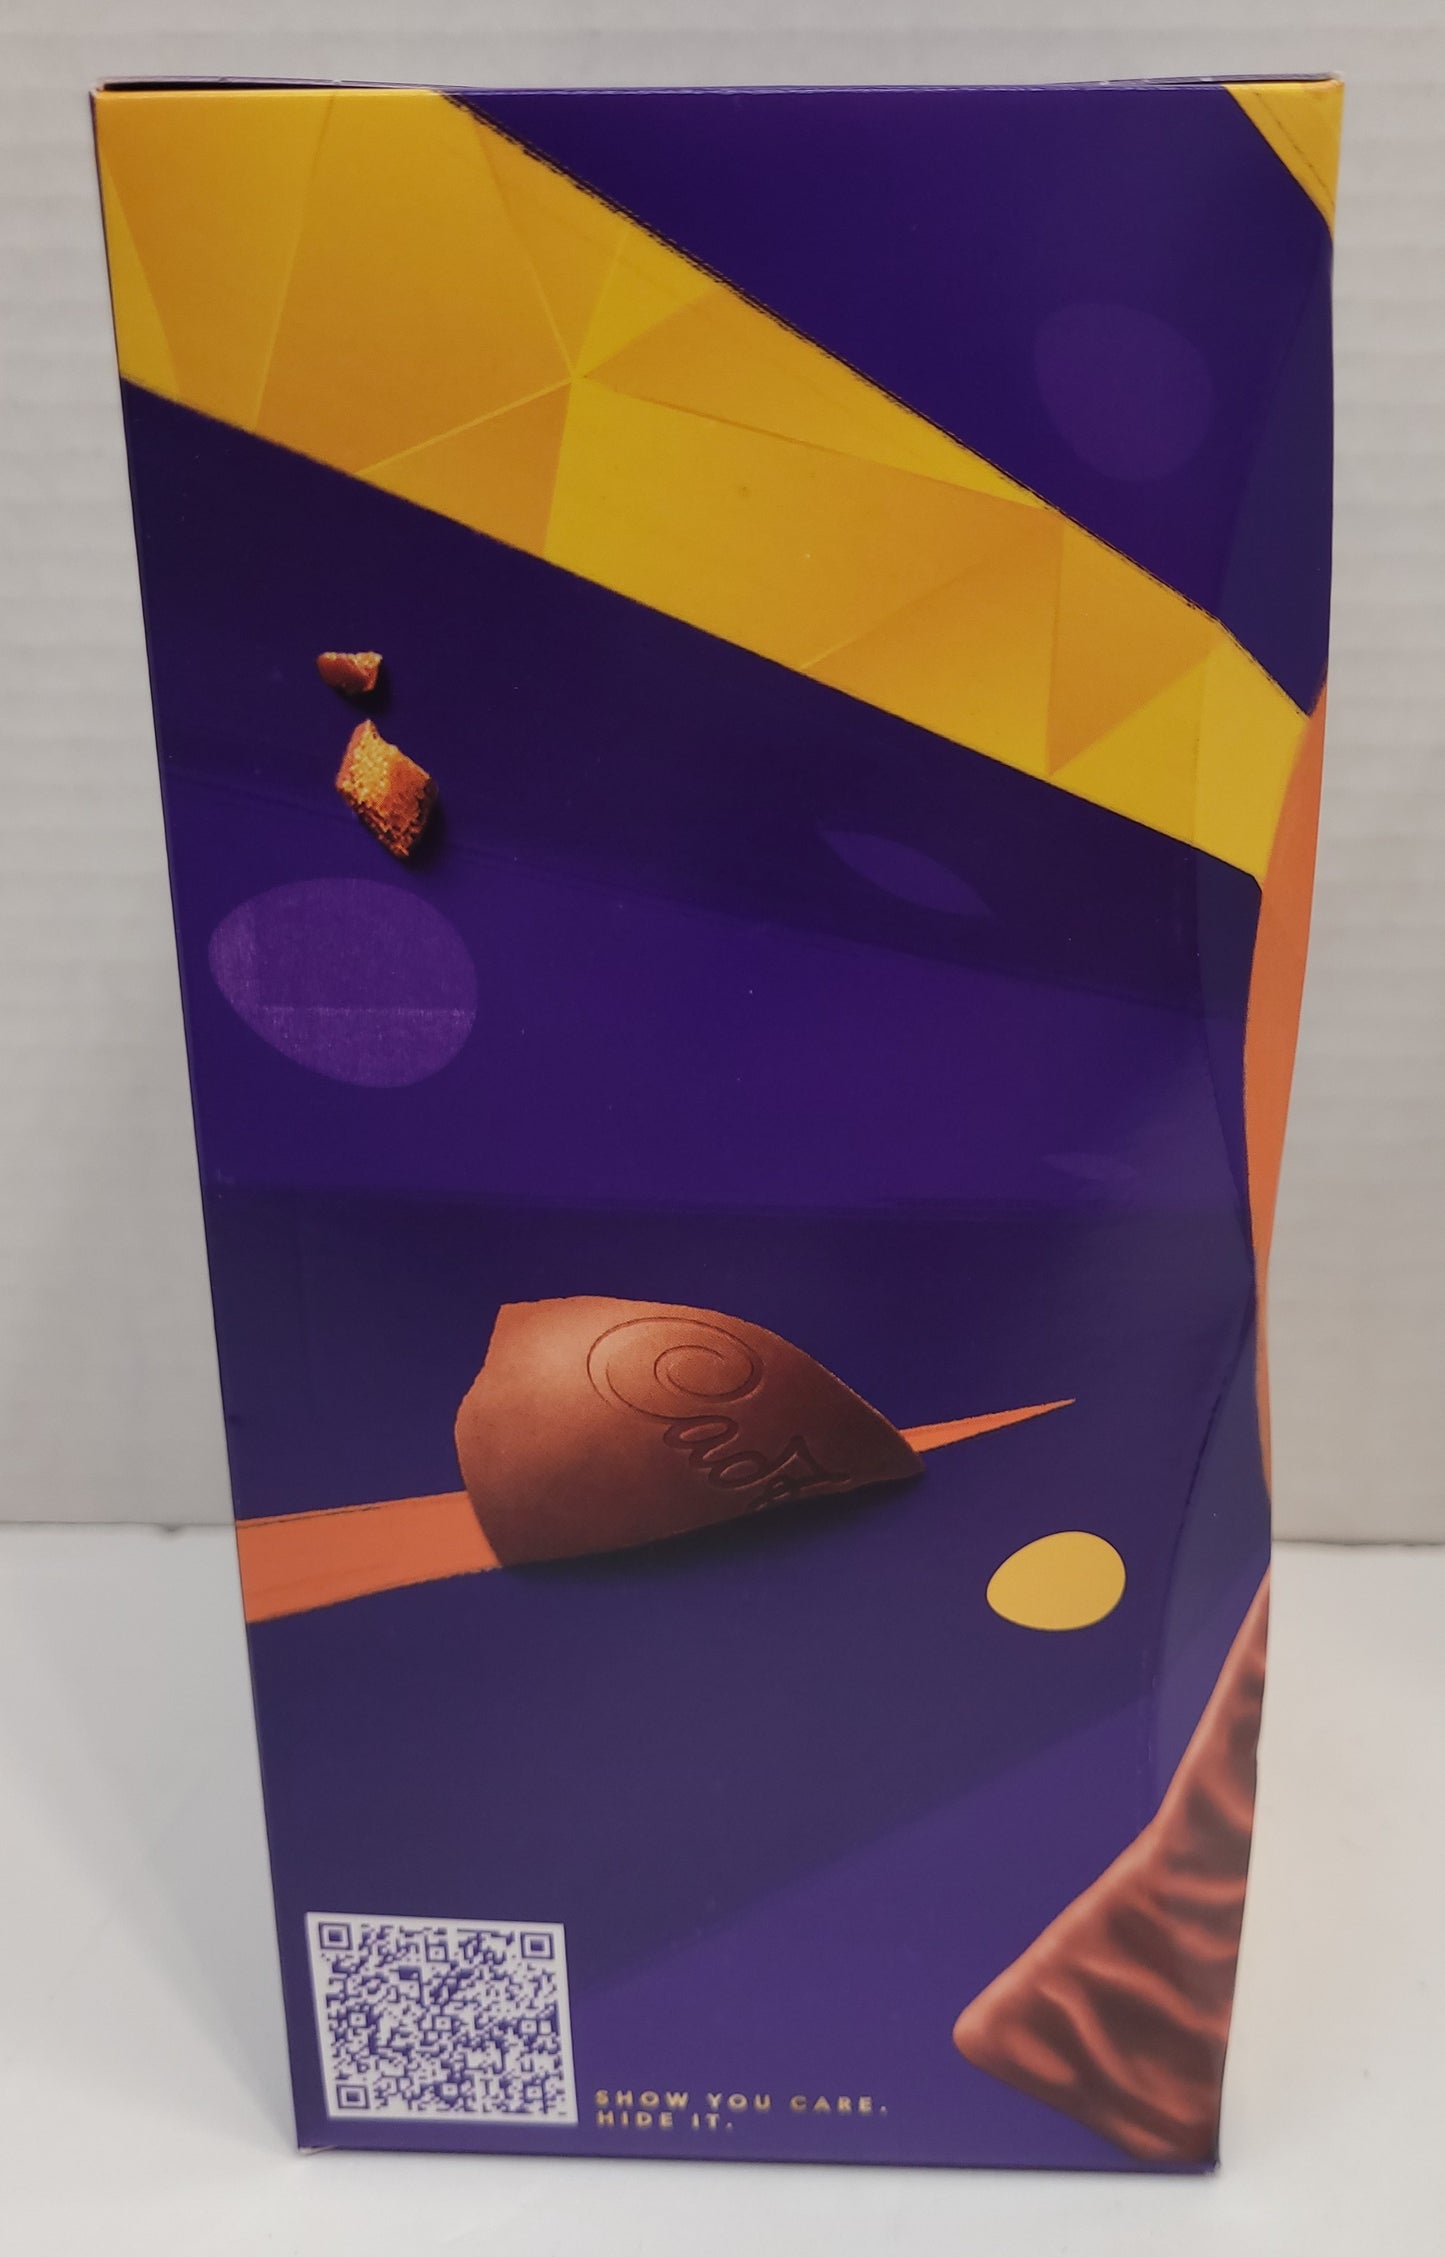 Side view of box - A hollow chocolate egg made with the world-famous Cadbury Dairy Milk chocolate and filled with two Cadbury Crunchie bars.   Bright festive packaging  perfect for the holiday!    Contents: One hollow chocolate egg and two bars of honeycombed milk chocolate.  Size: 190g.   Imported from the UK